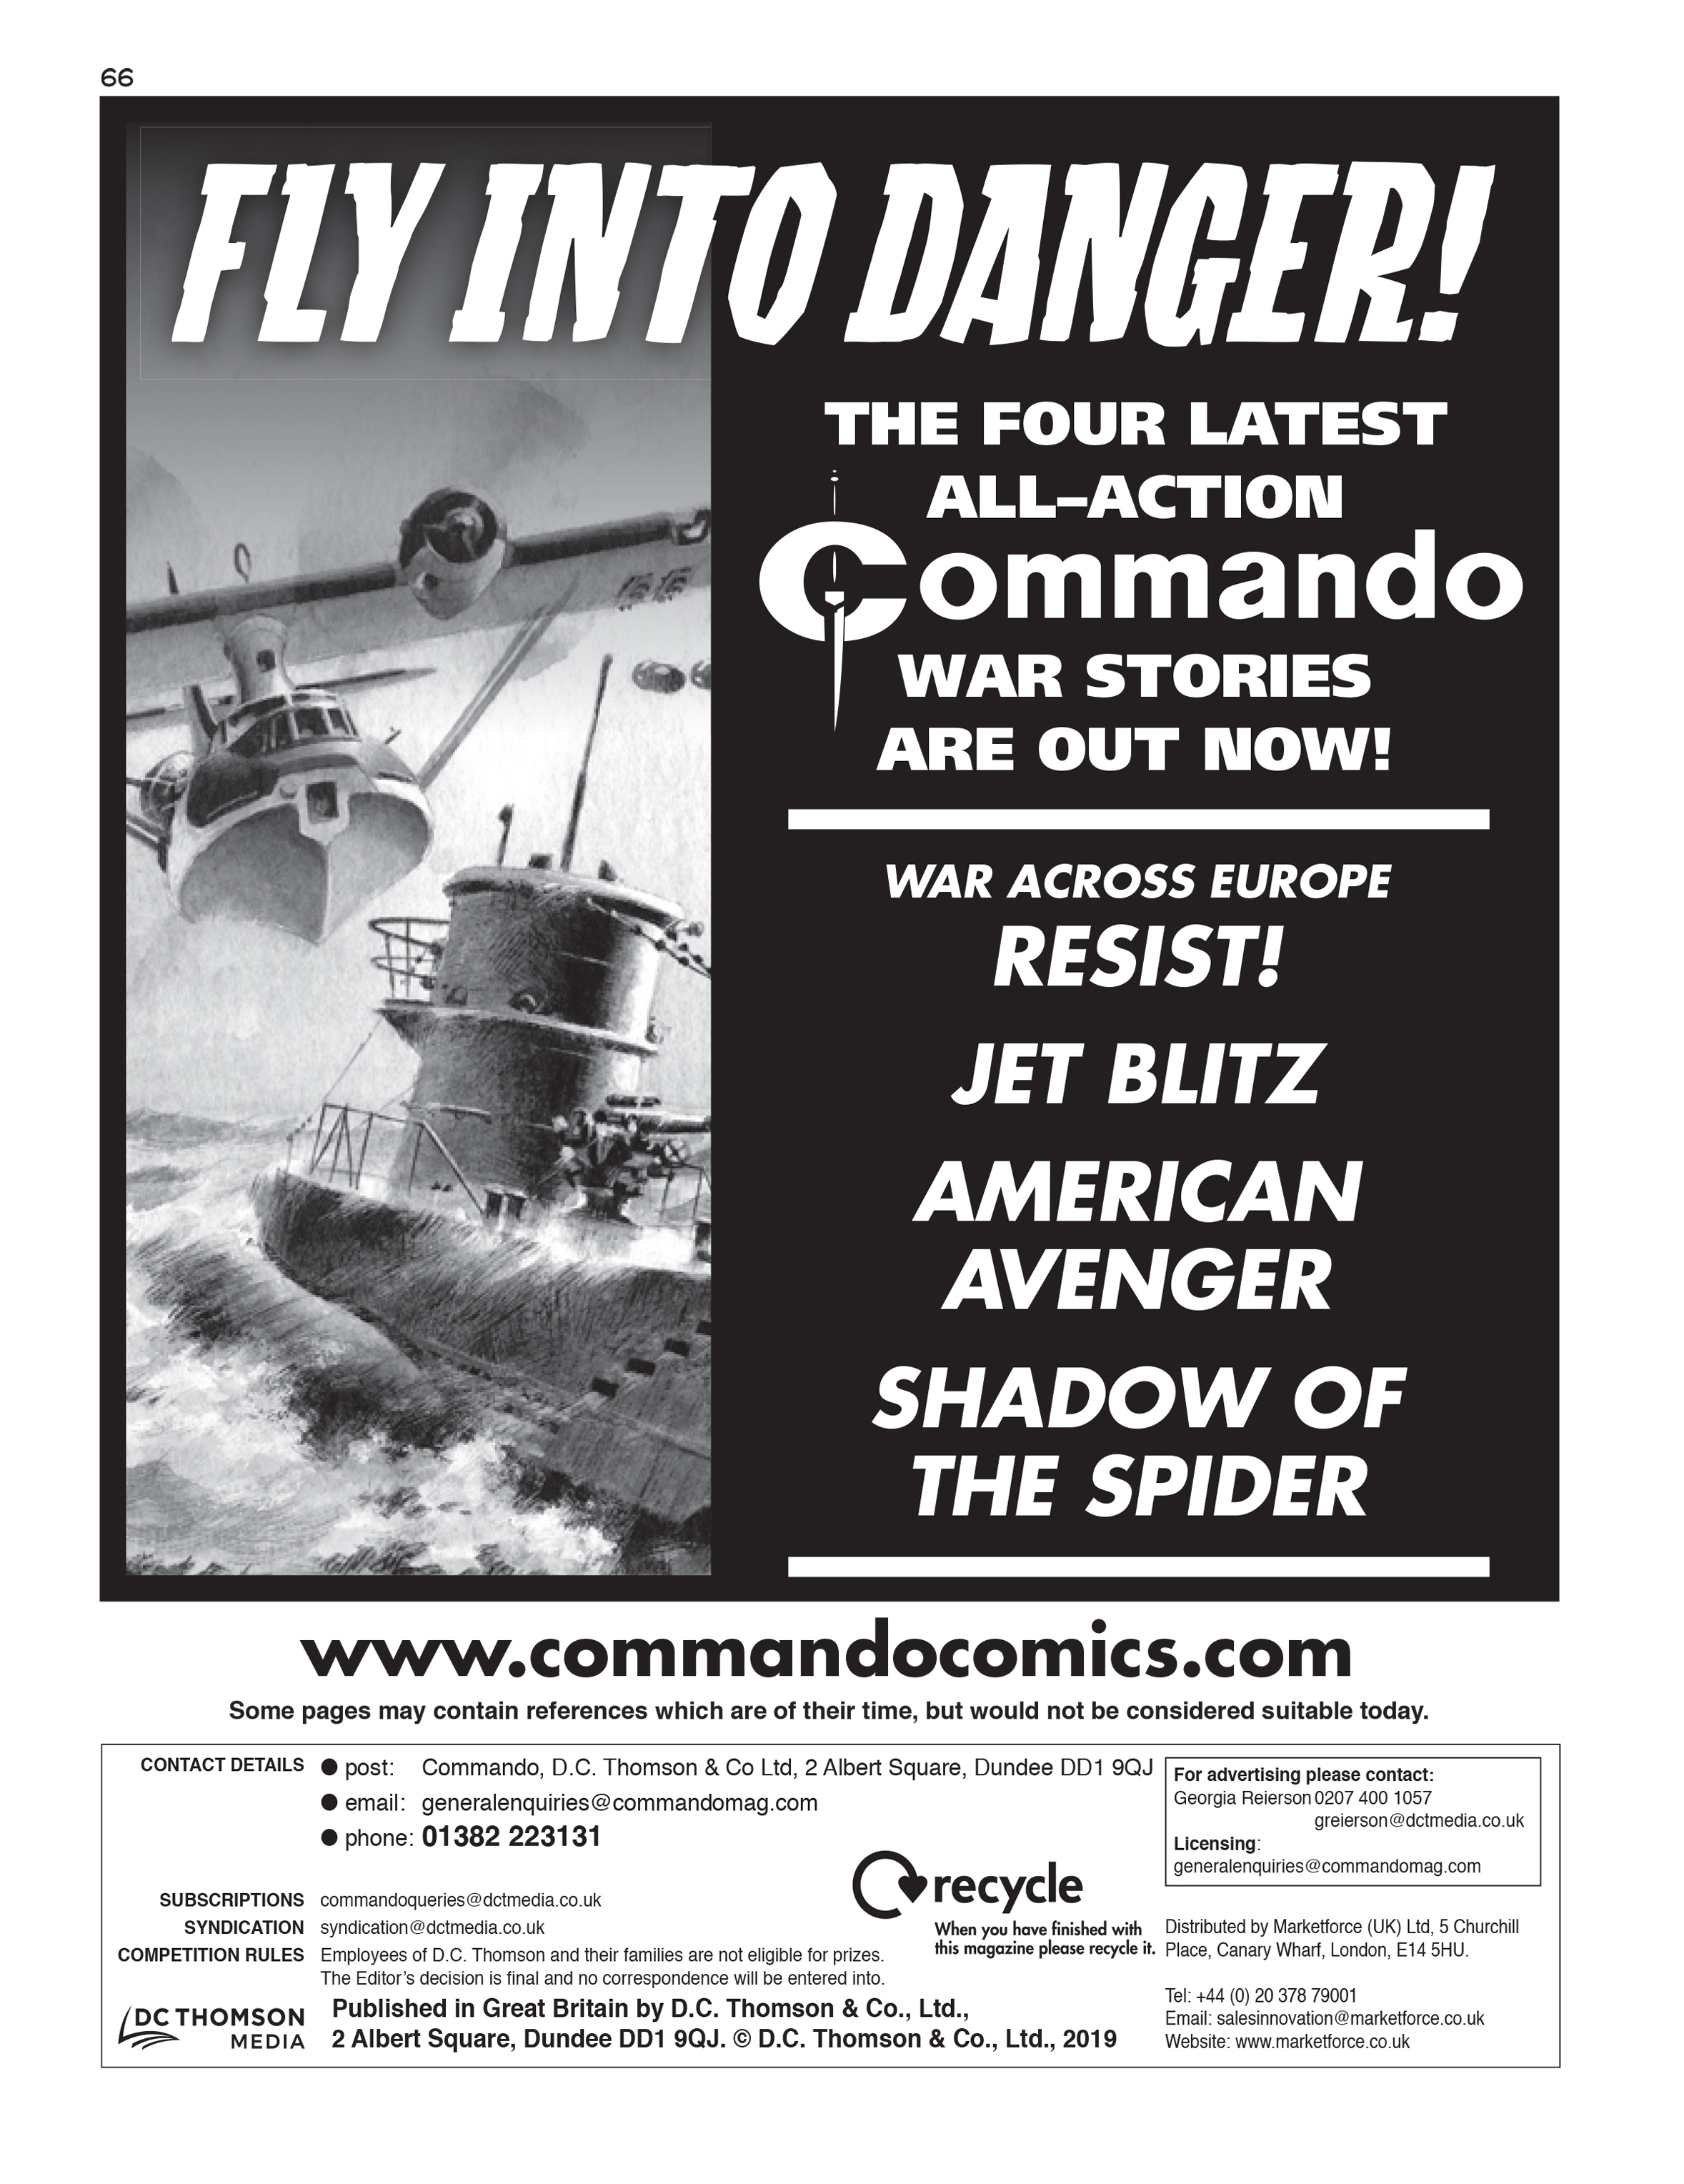 Read online Commando: For Action and Adventure comic -  Issue #5209 - 65